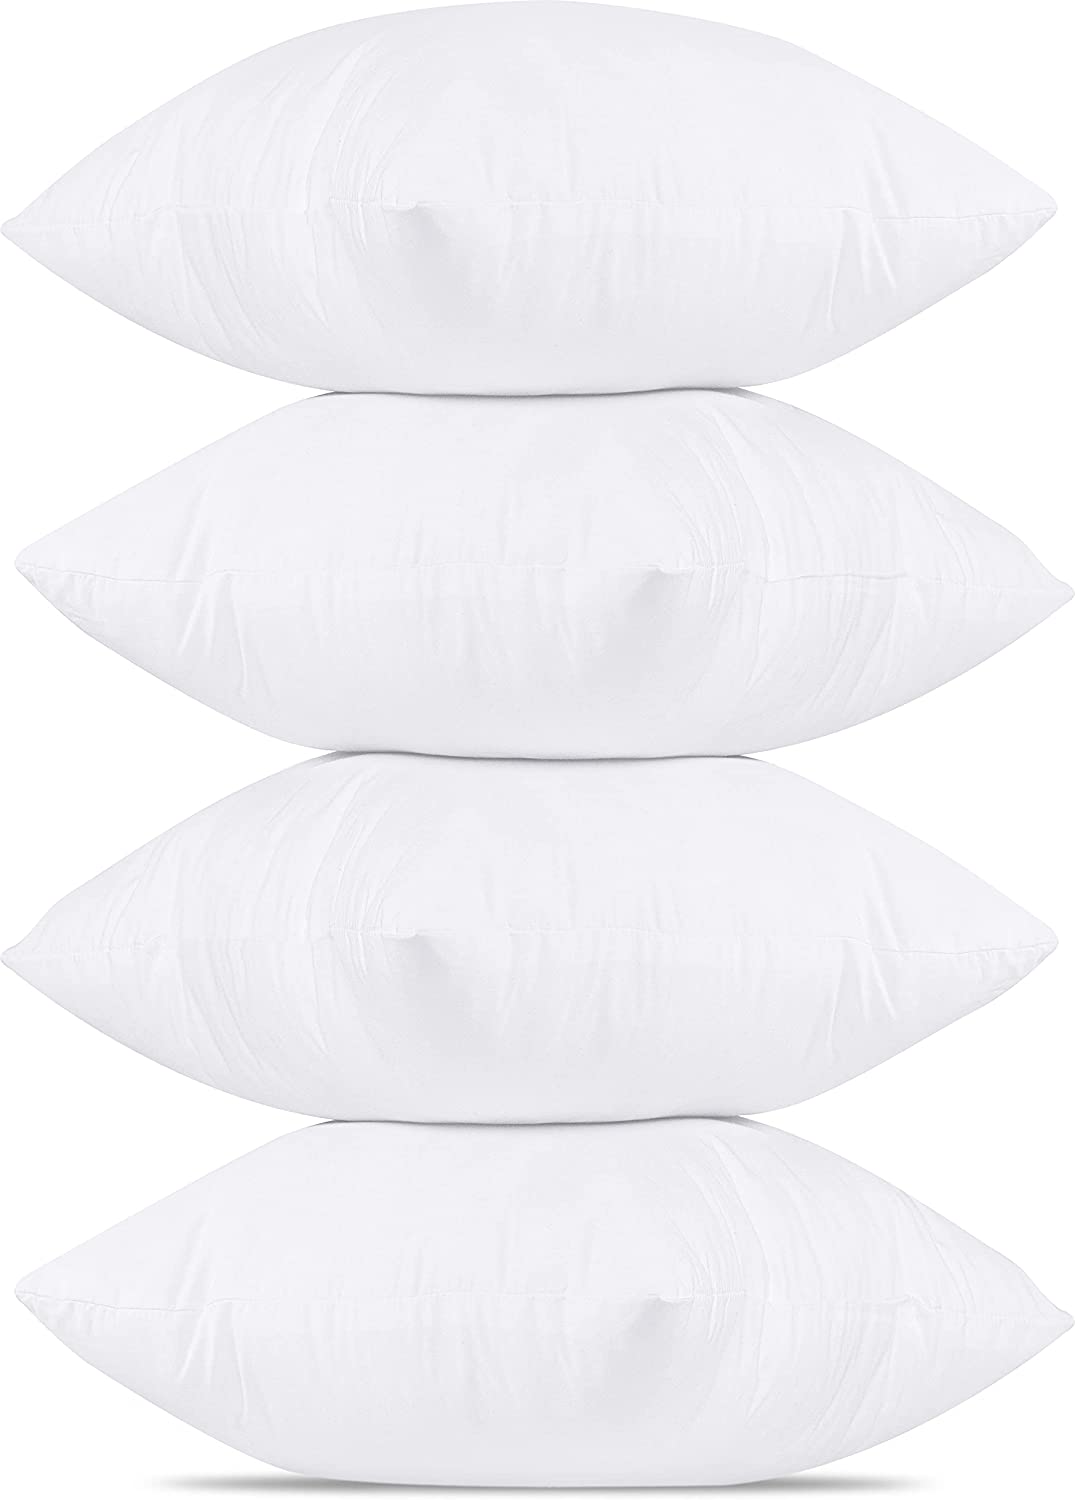 Bedding Cushion Inner Pads (Pack of 4) Cushion Stuffer Inserts, Cotton Blend Fabric 1